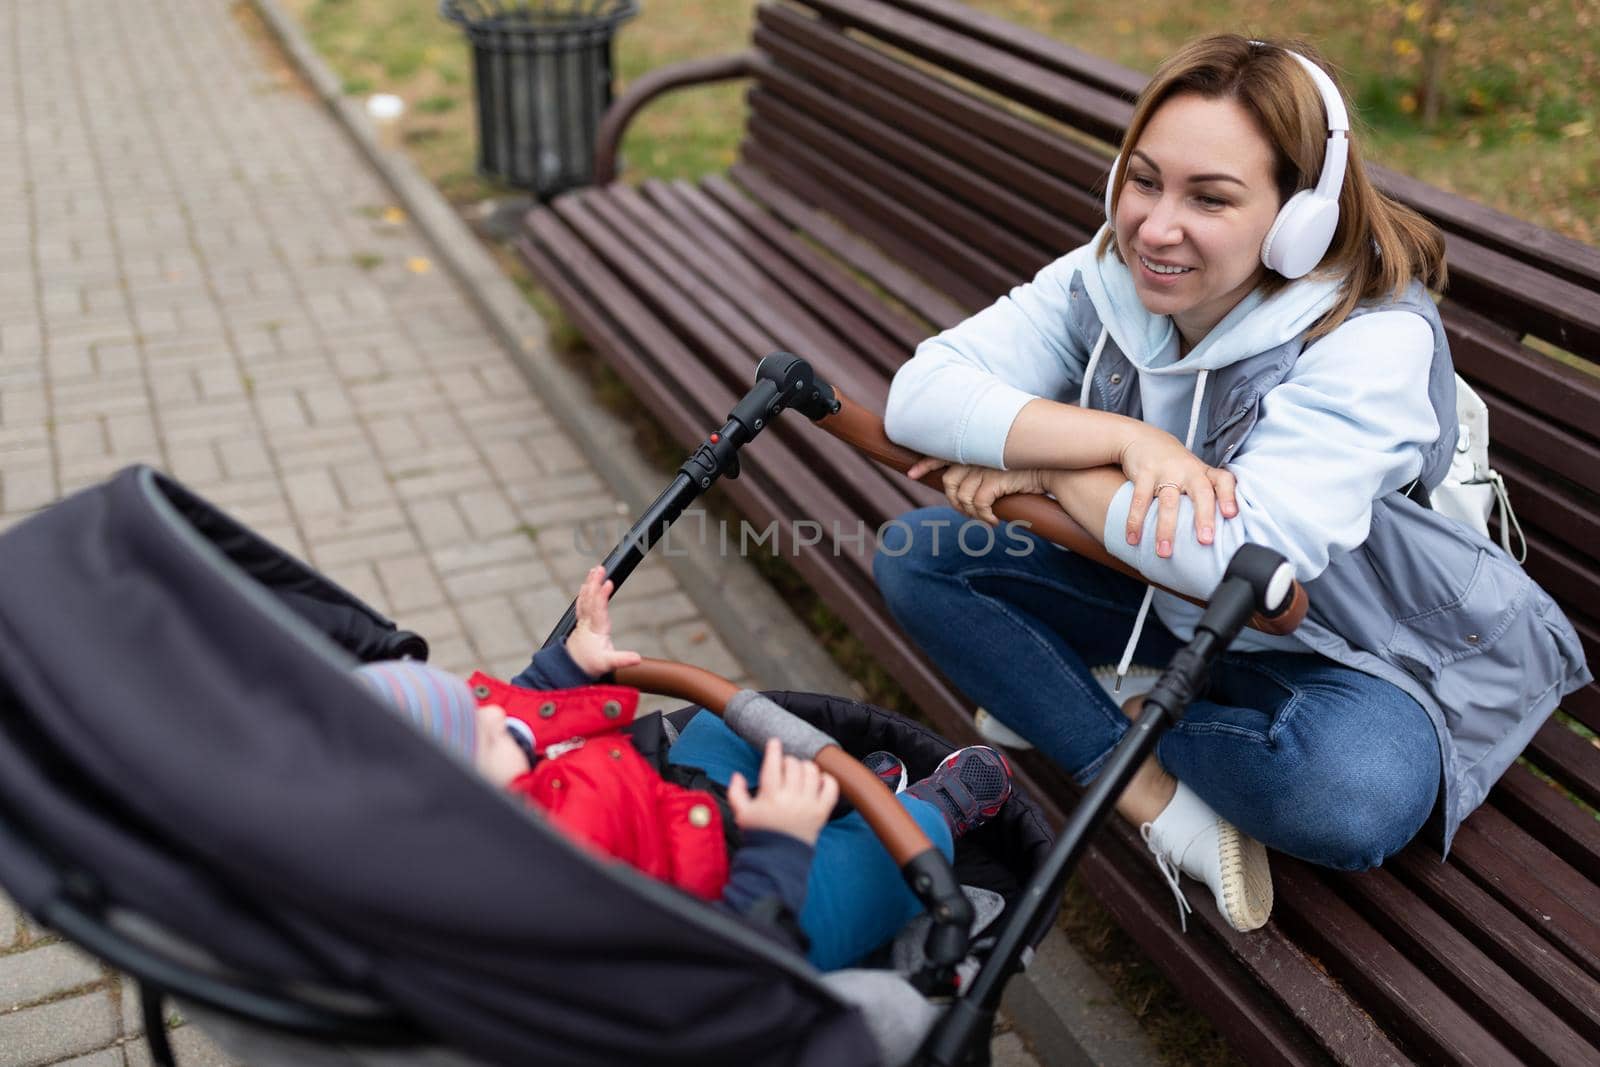 young woman sitting on a bench listening to music with headphones next to a pram with her baby.